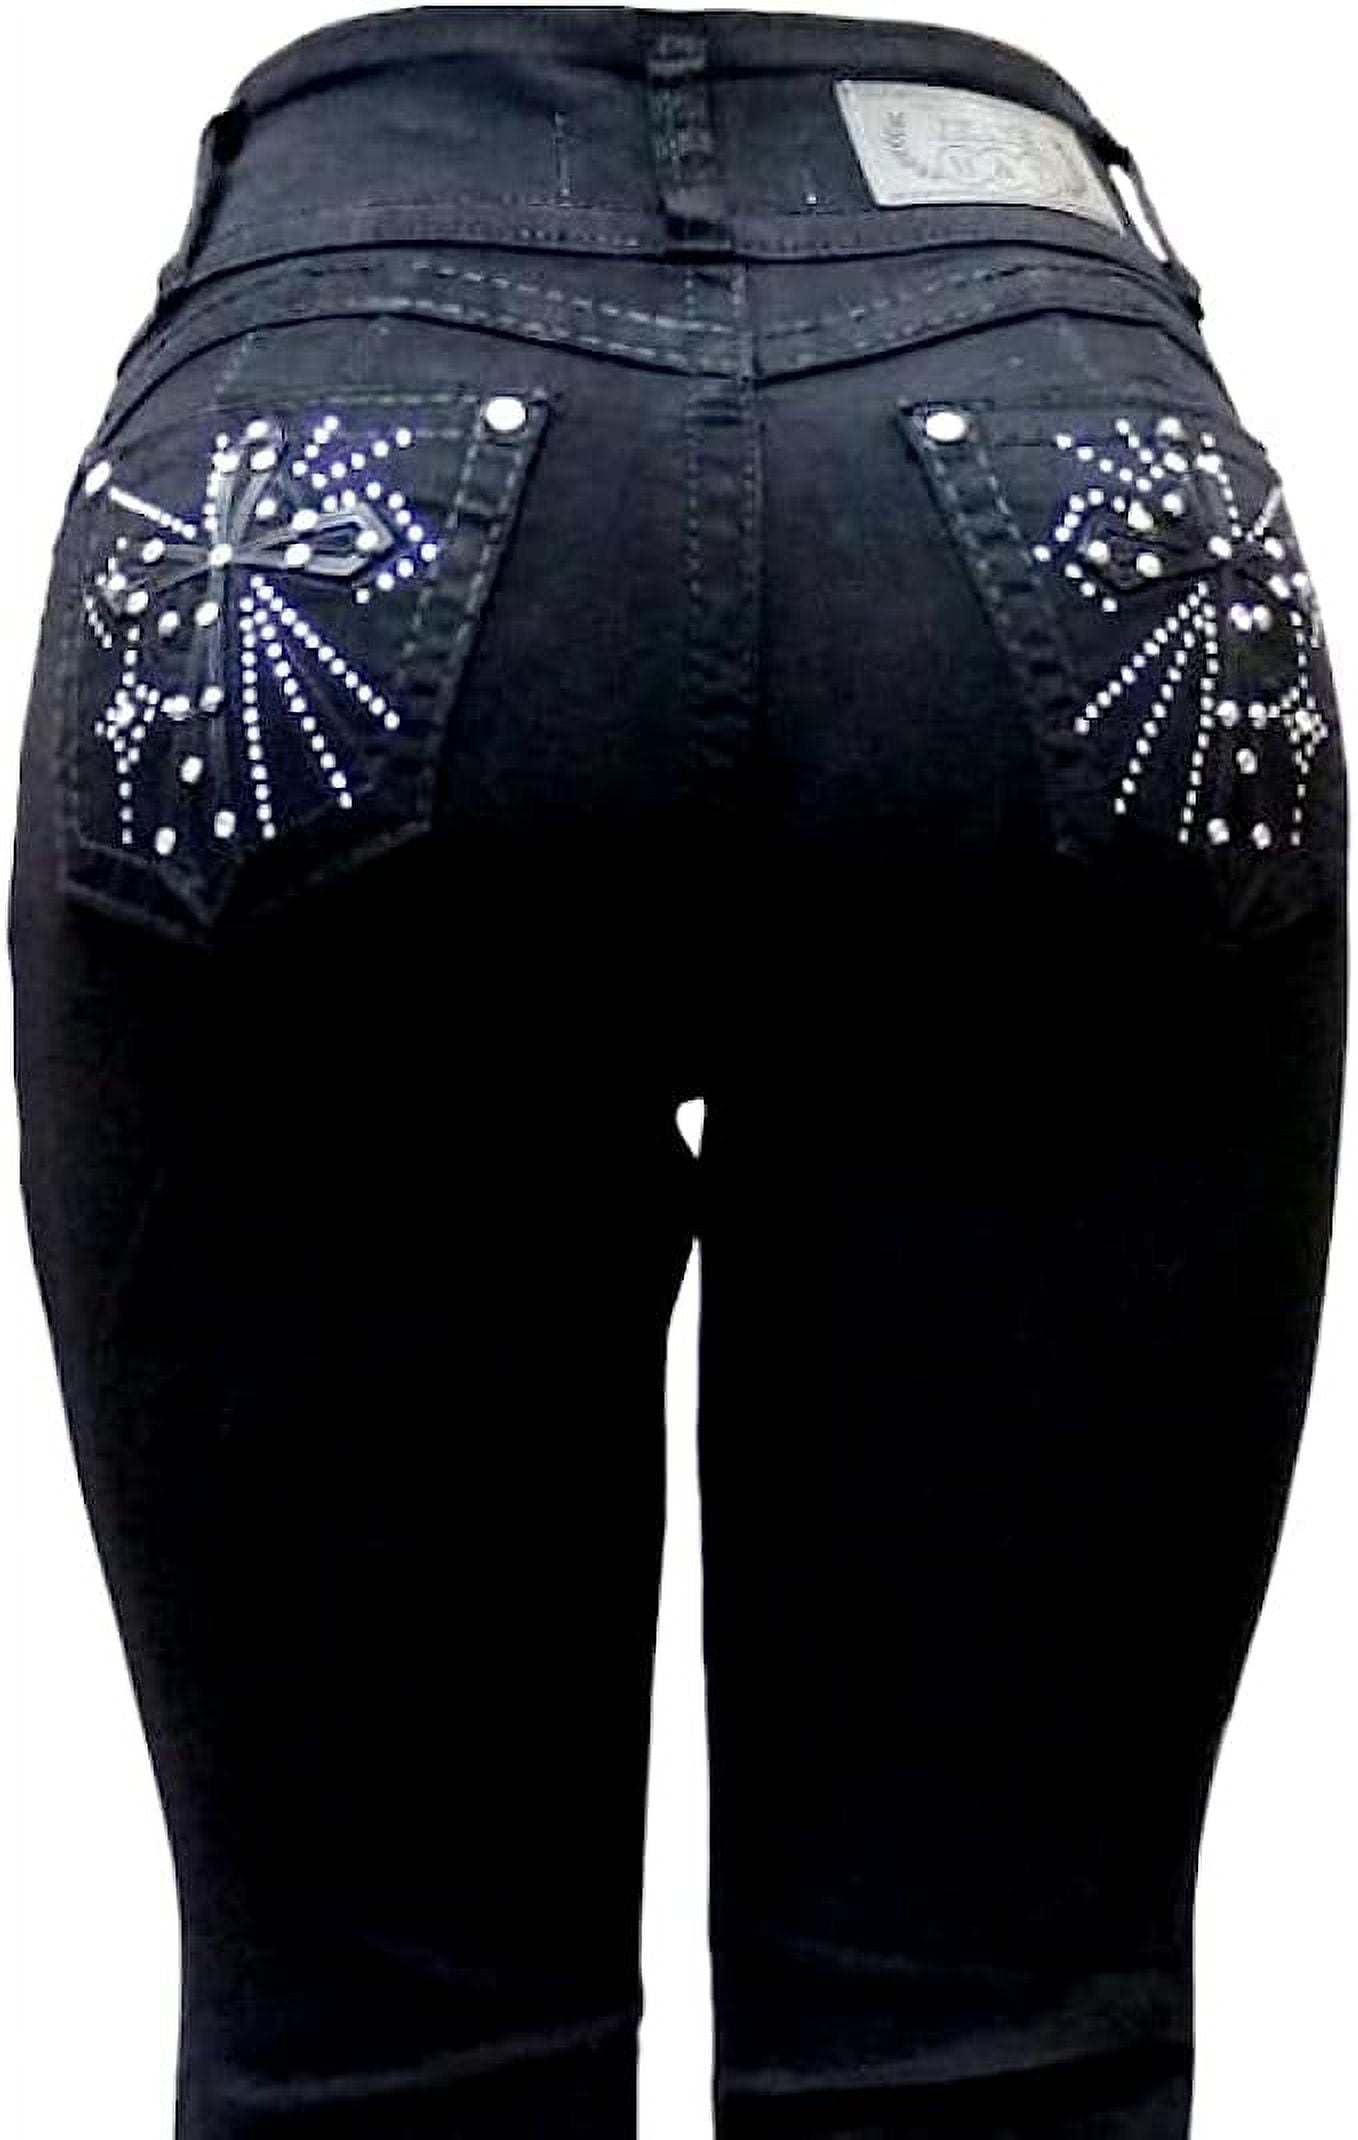 Concert Ready Cotton No Stretch SIDE Panel Rhinestone Jeans